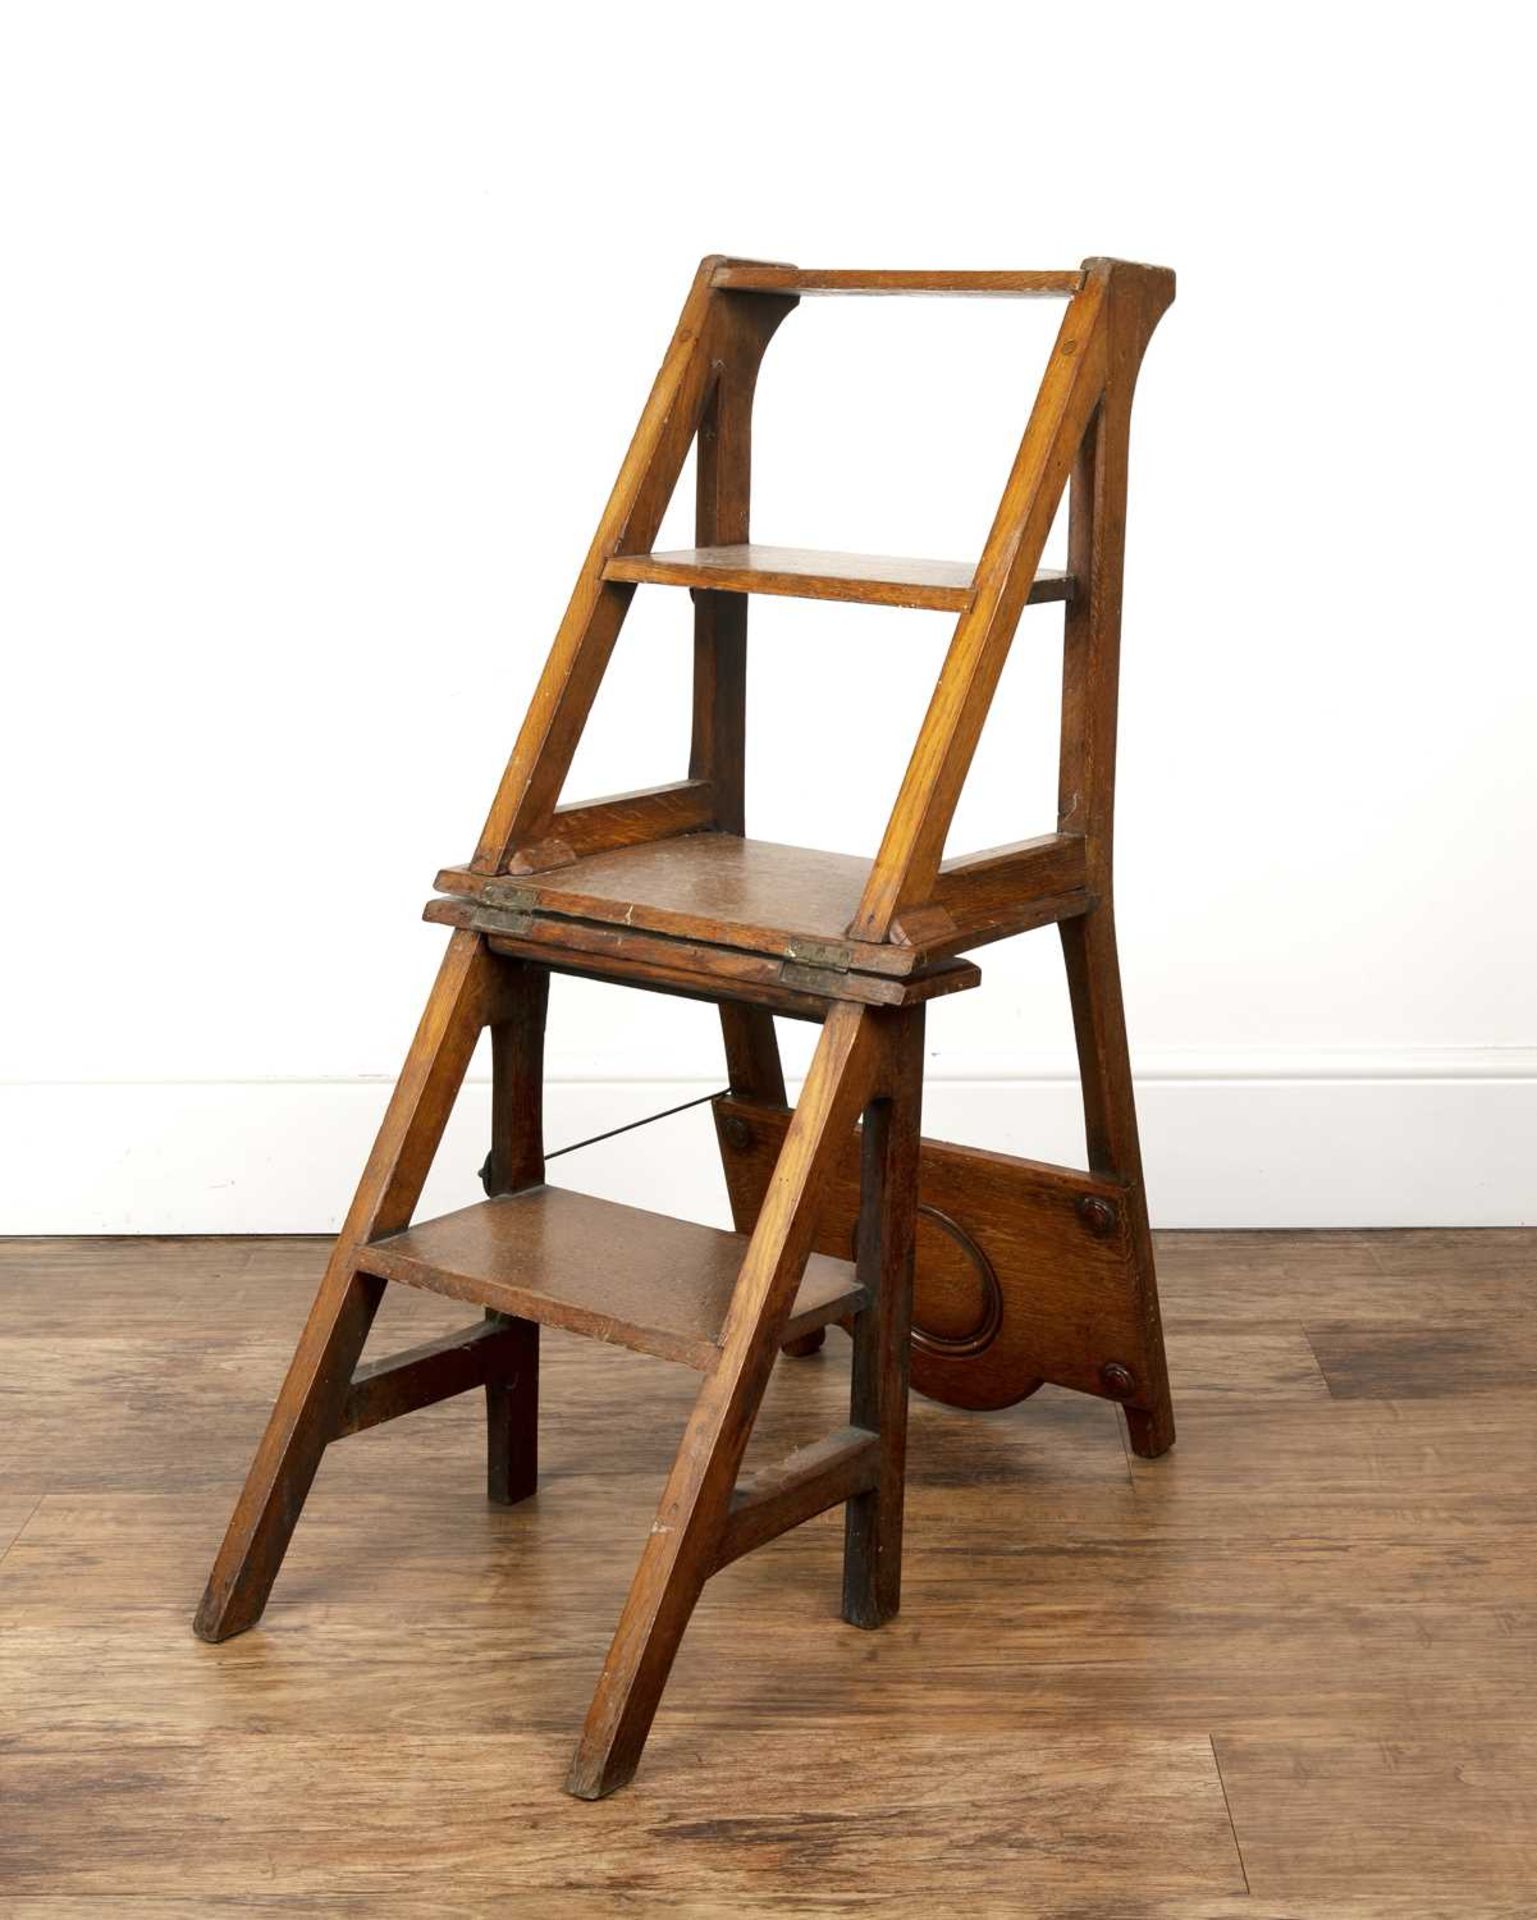 Oak metamorphic chair/library steps Victorian, with carved roundel back, 89cm high overall when - Image 4 of 5